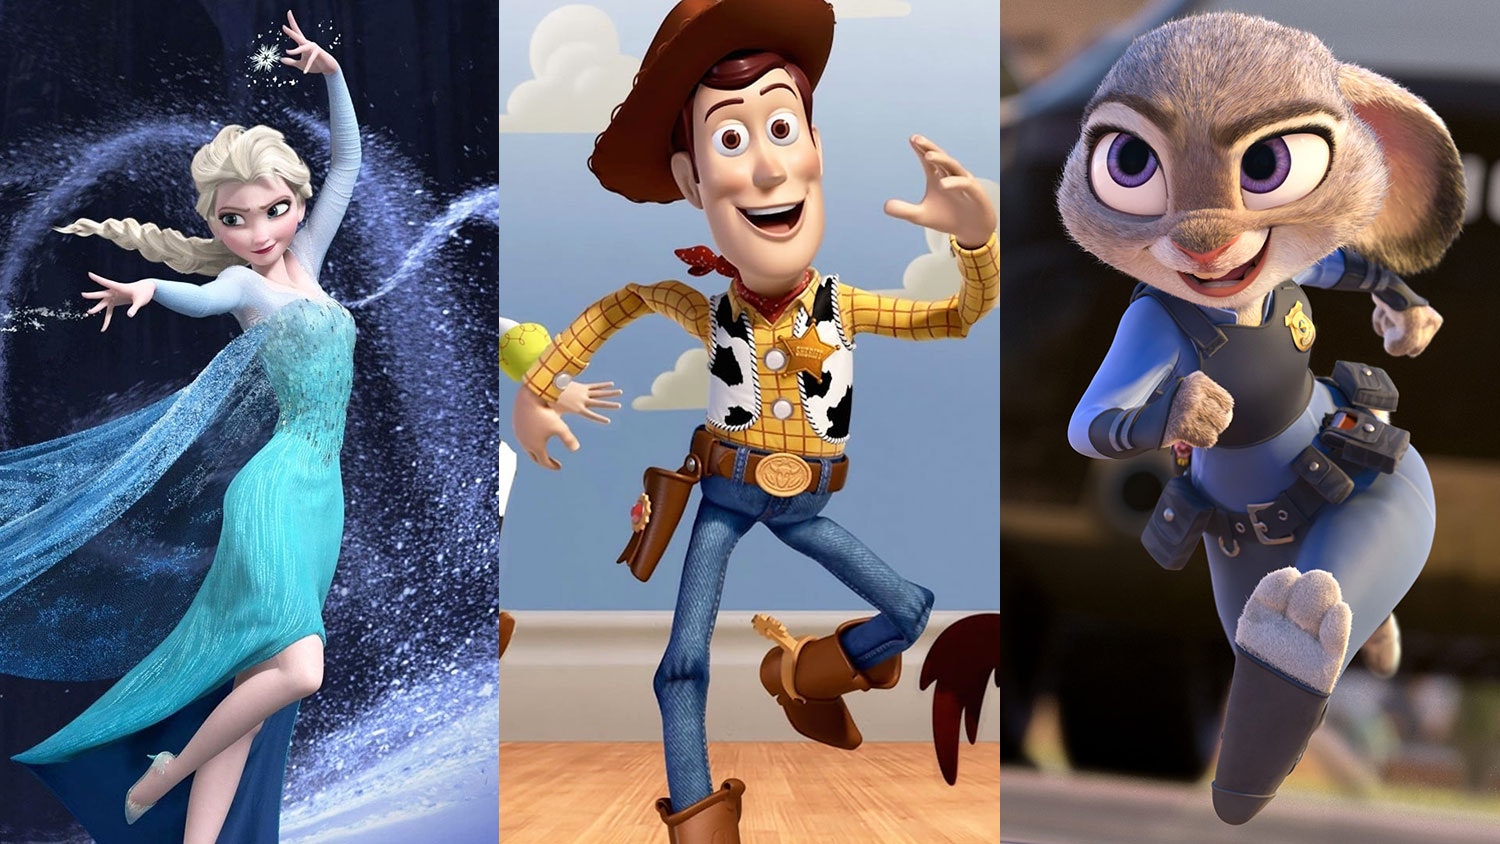 Toy Story 5 has officially been confirmed by Disney & Pixar